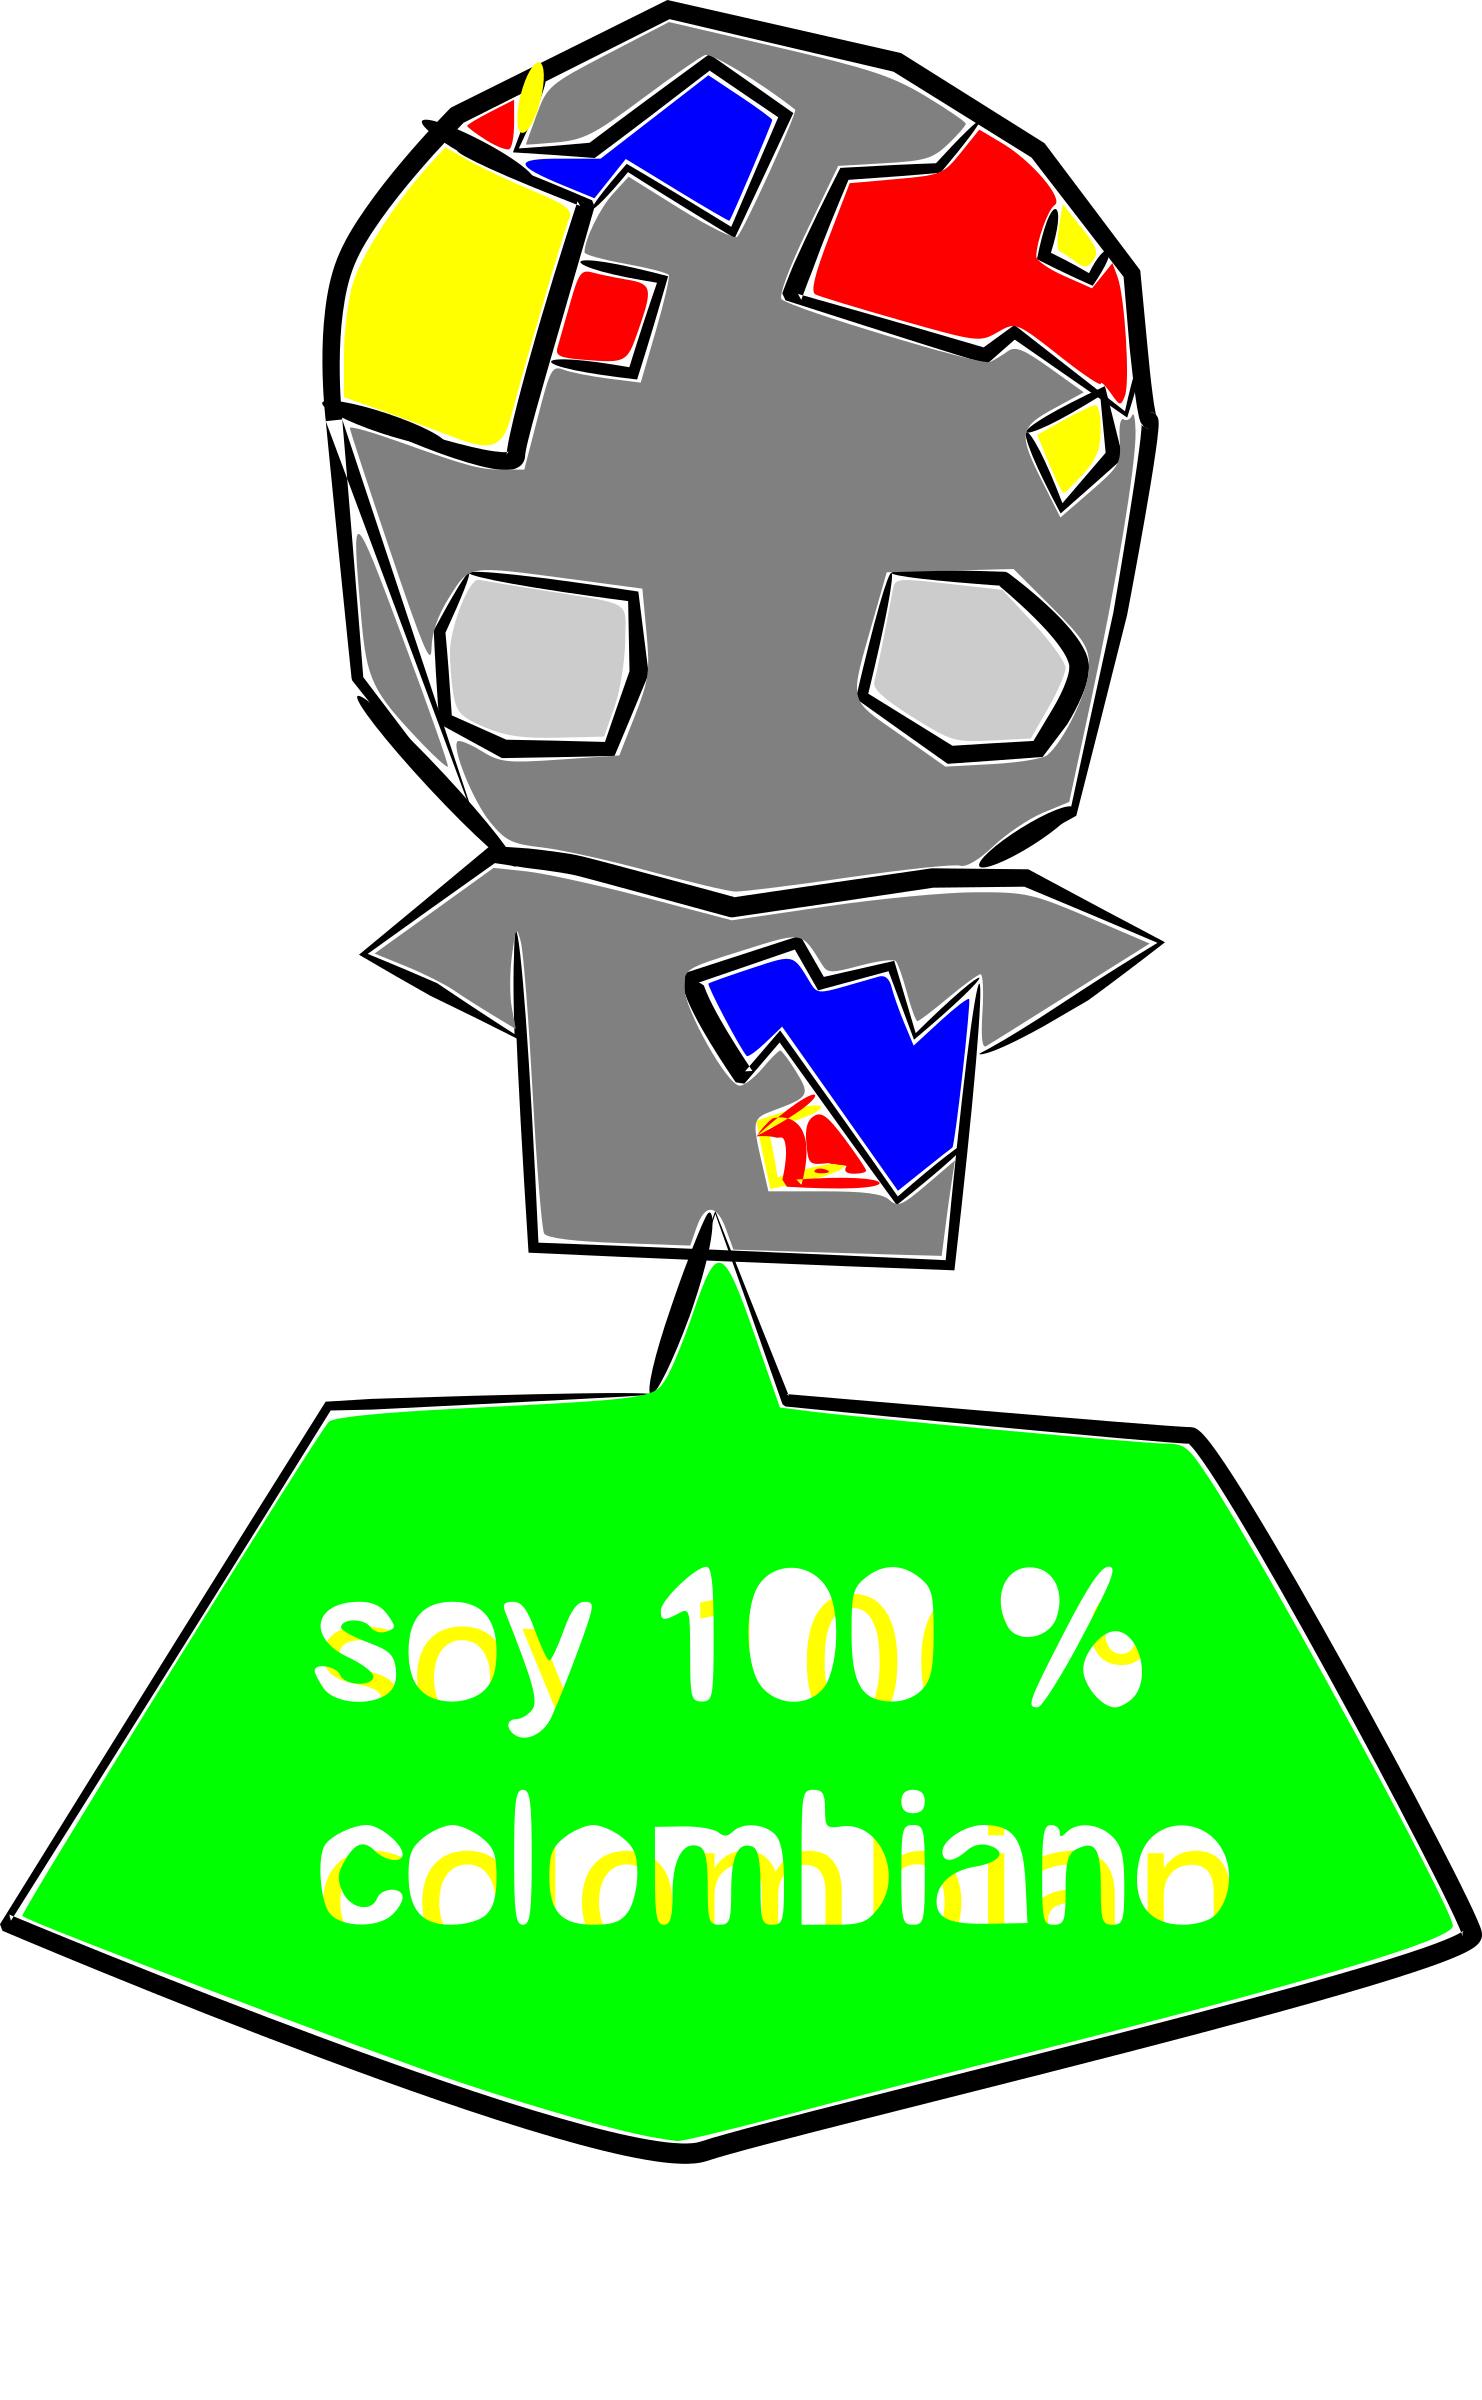 soy 100 % colombiano png